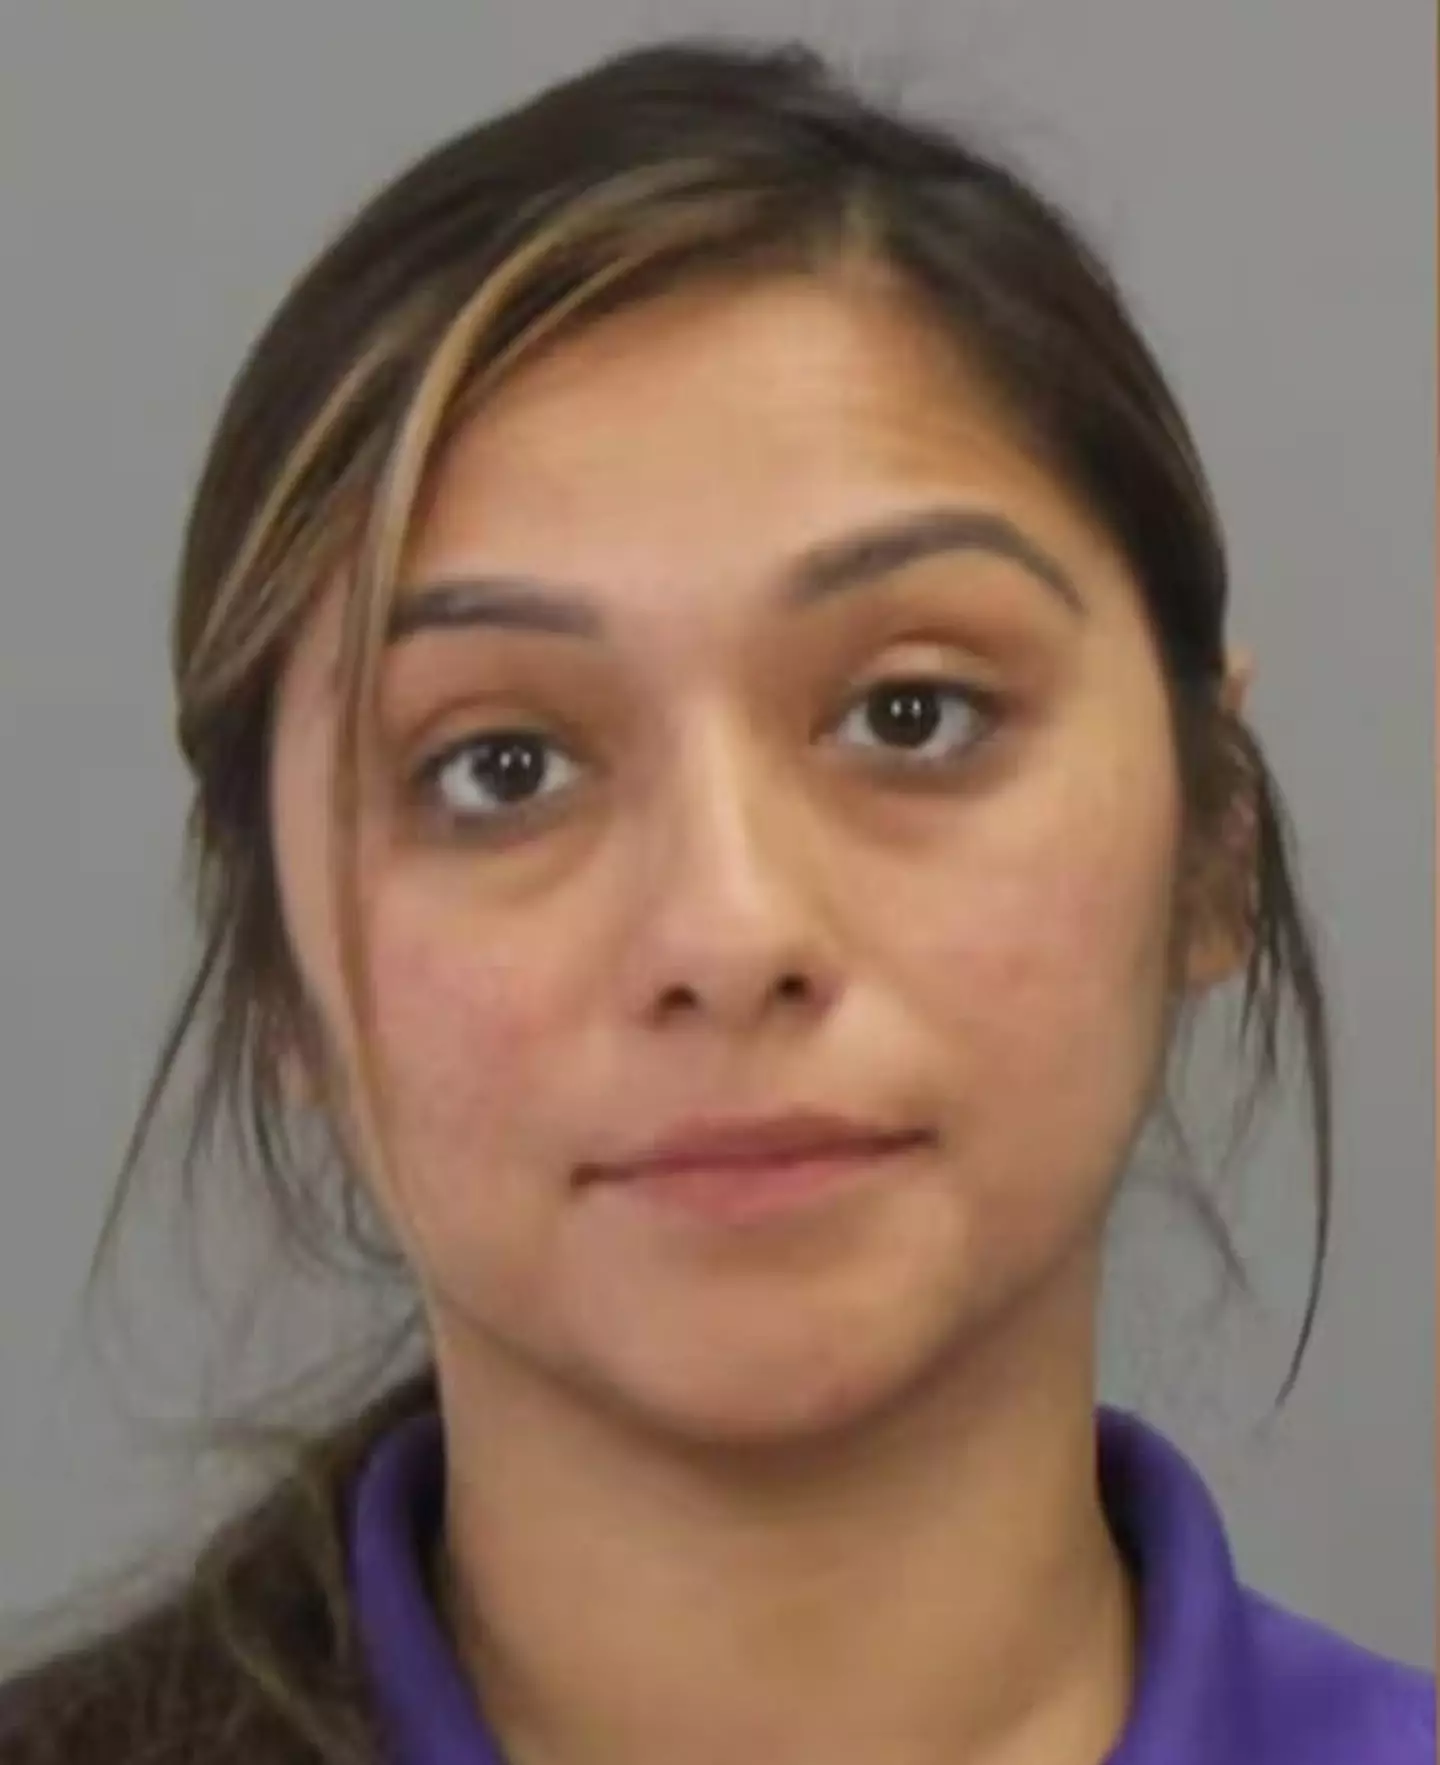 Stephanie Arevalo was arrested after calling the police on herself. (KBTX)